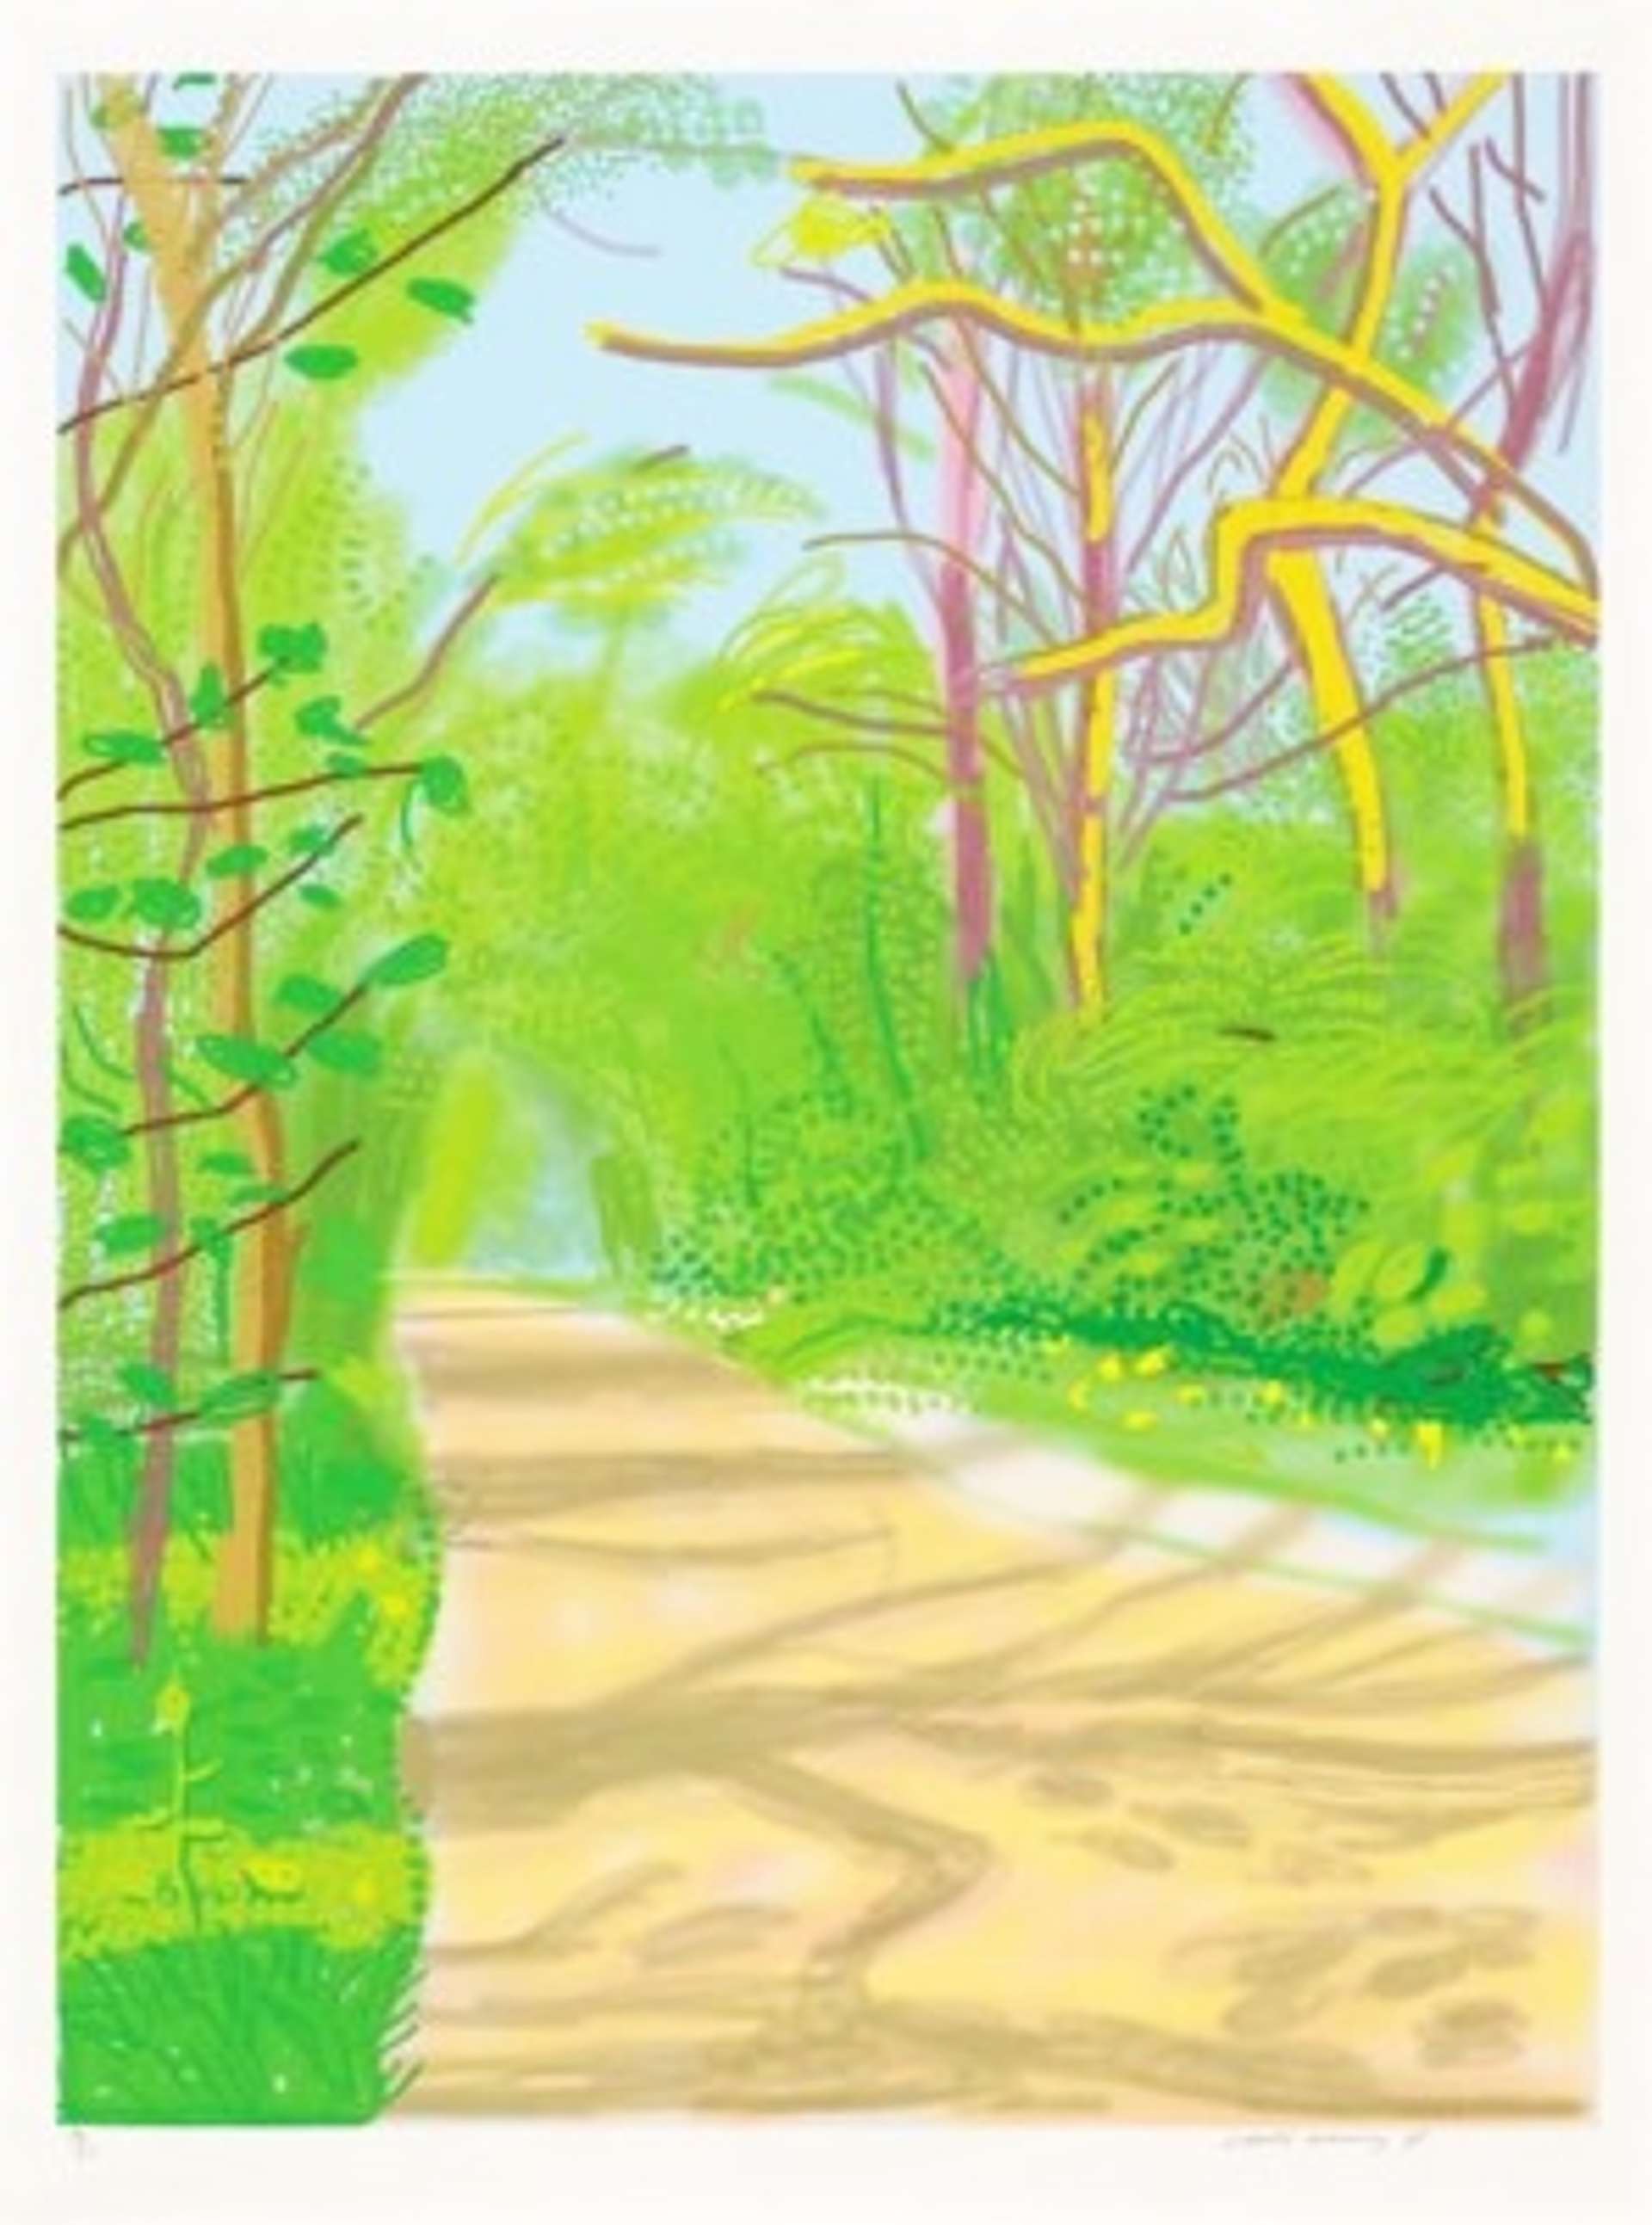 The Arrival Of Spring In Woldgate East Yorkshire 25th April 2011 by David Hockney